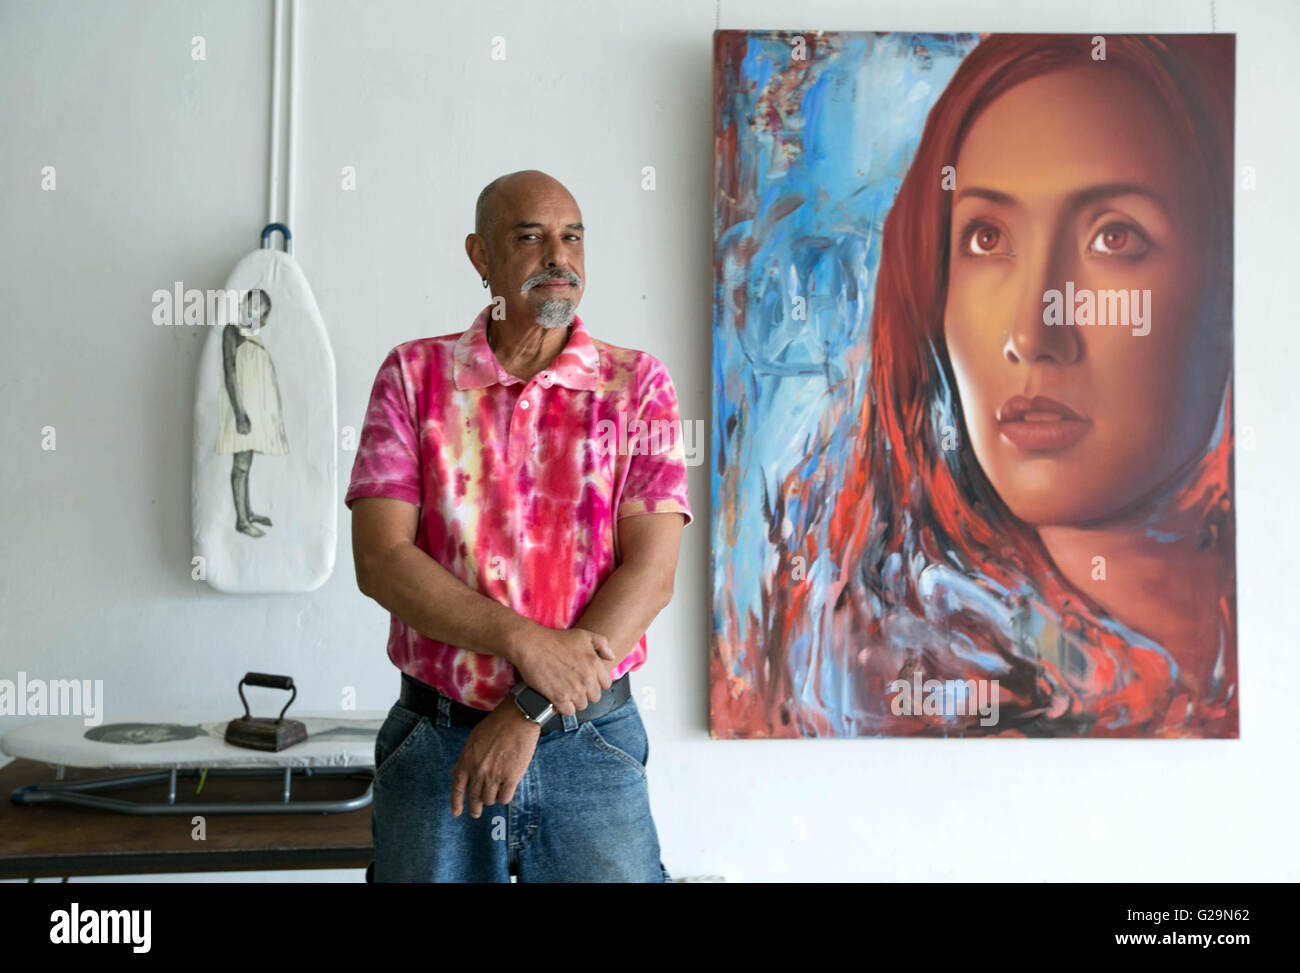 May 27, 2016 - West Palm Beach, Florida, U.S. - Rolando Chang Barrero at The Box Art Gallery on Belvedere Road in West Palm Beach, Florida on May 27, 2016. Rolando is a former Miami artist who started the Arts District in Boynton and now hopes to do something similar on Belvedere. He came up with the ''Cultural Corridor'' brand. (Credit Image: © Allen Eyestone/The Palm Beach Post via ZUMA Wire) Stock Photo